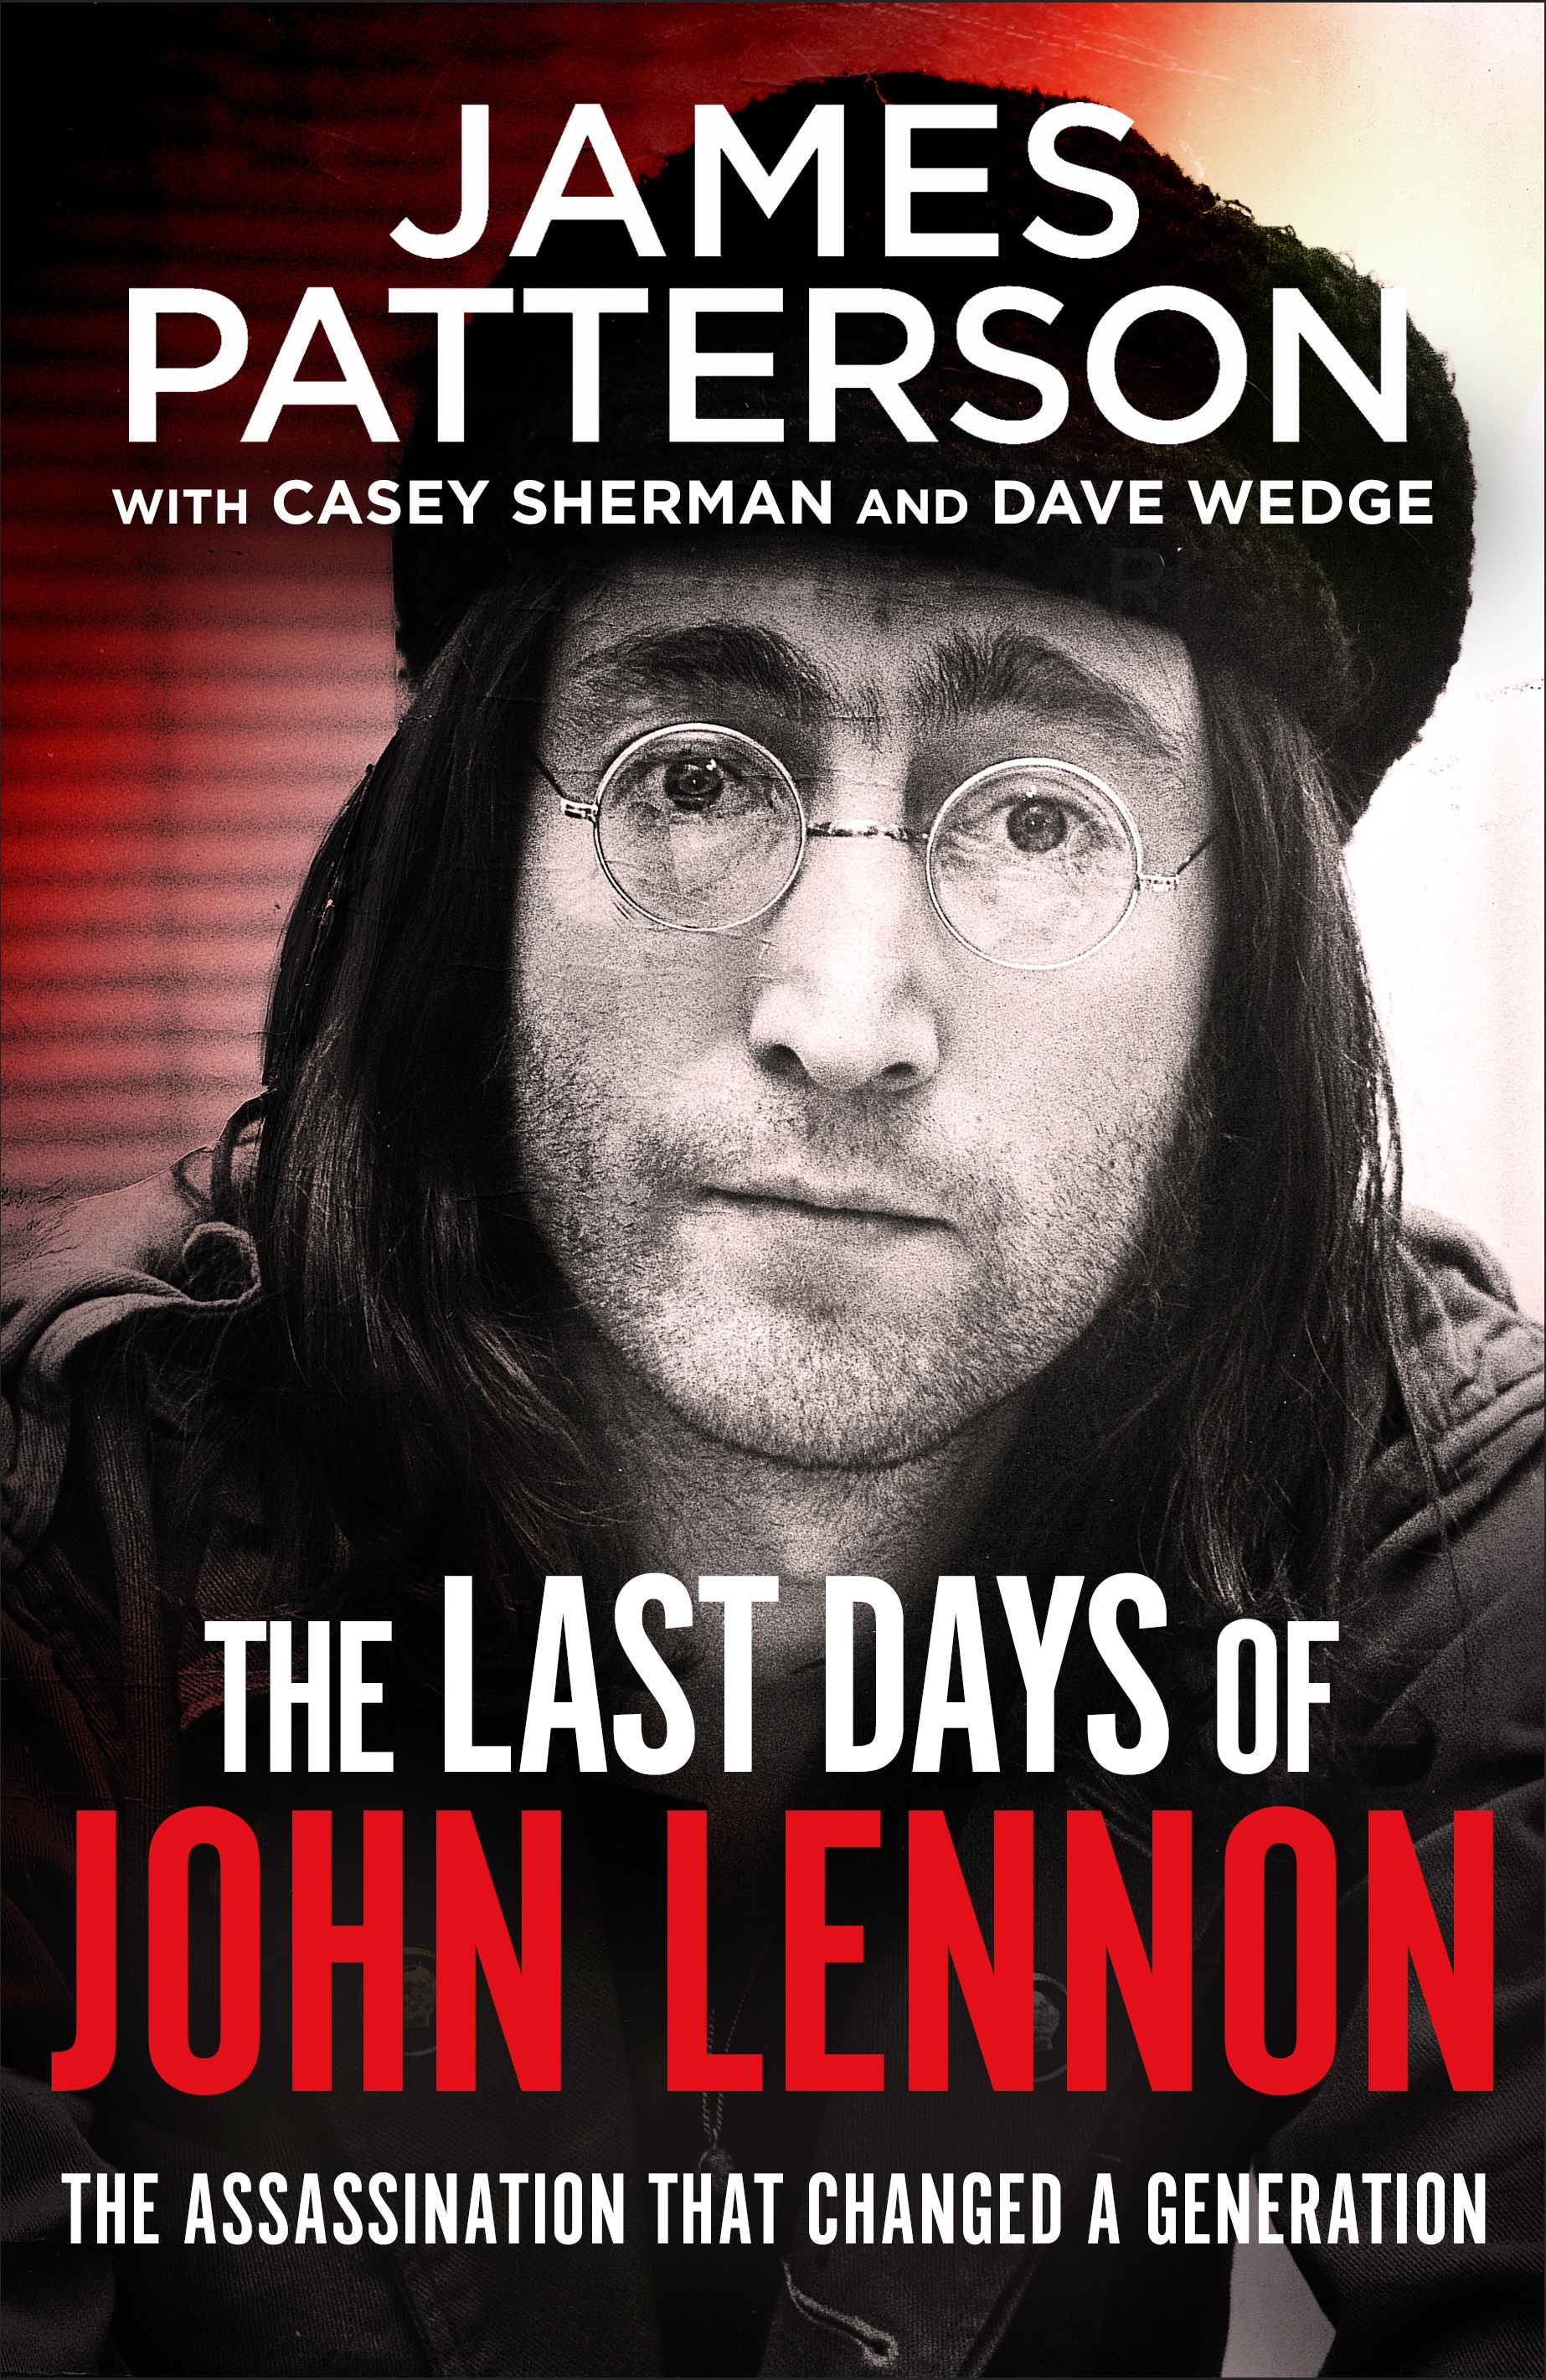 Book “The Last Days of John Lennon” by James Patterson — December 10, 2020